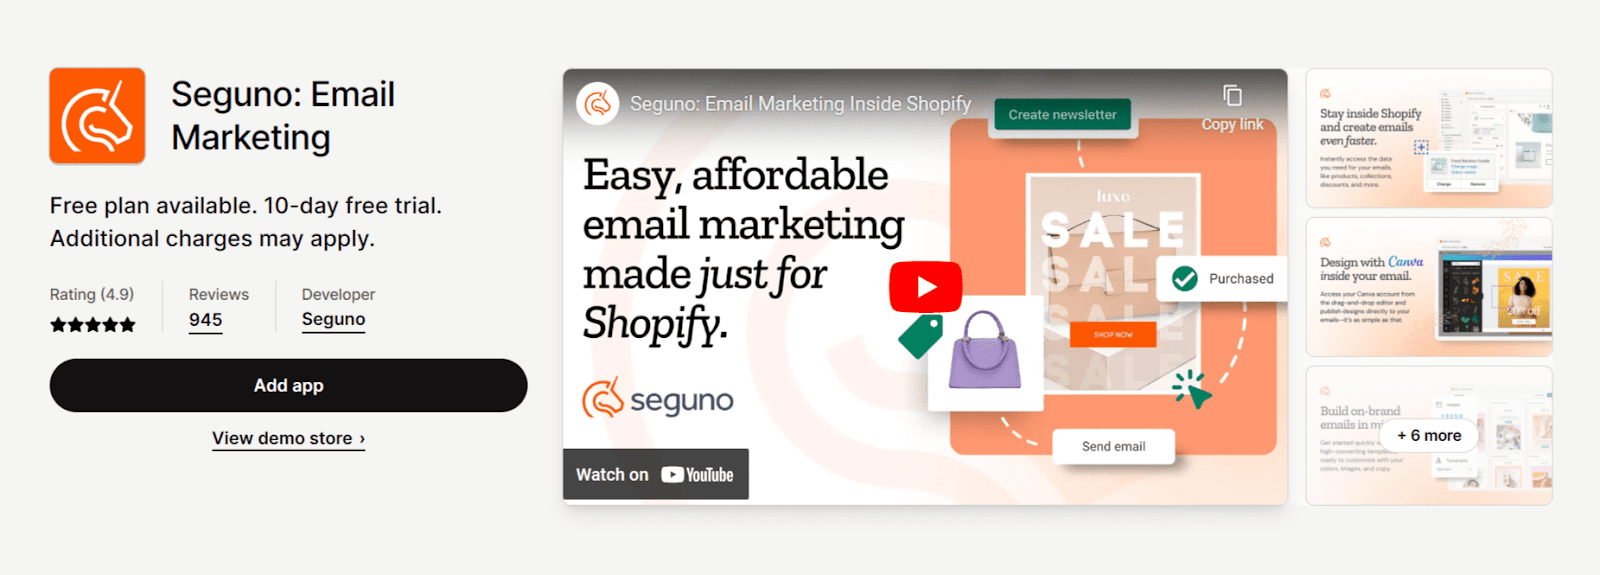 email marketing with shopify - seguno